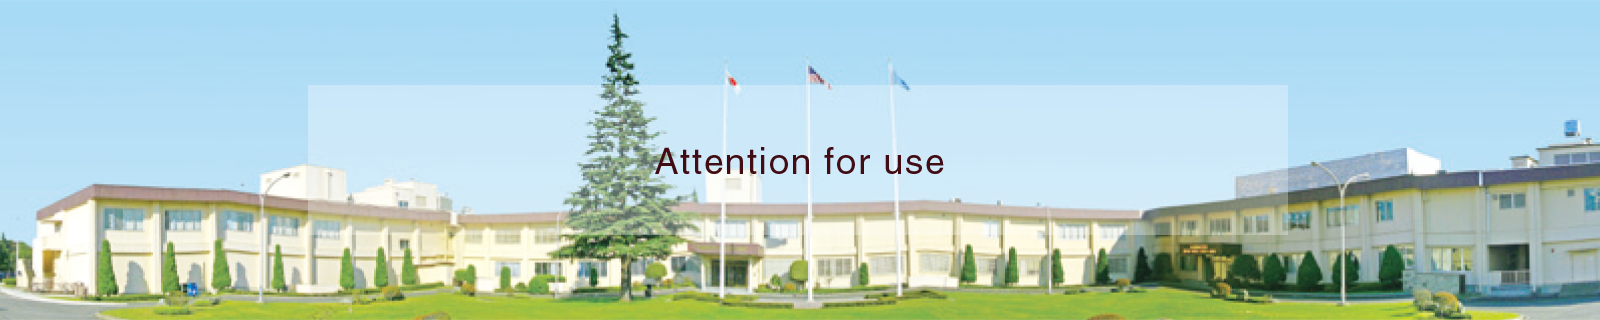 Attention for use